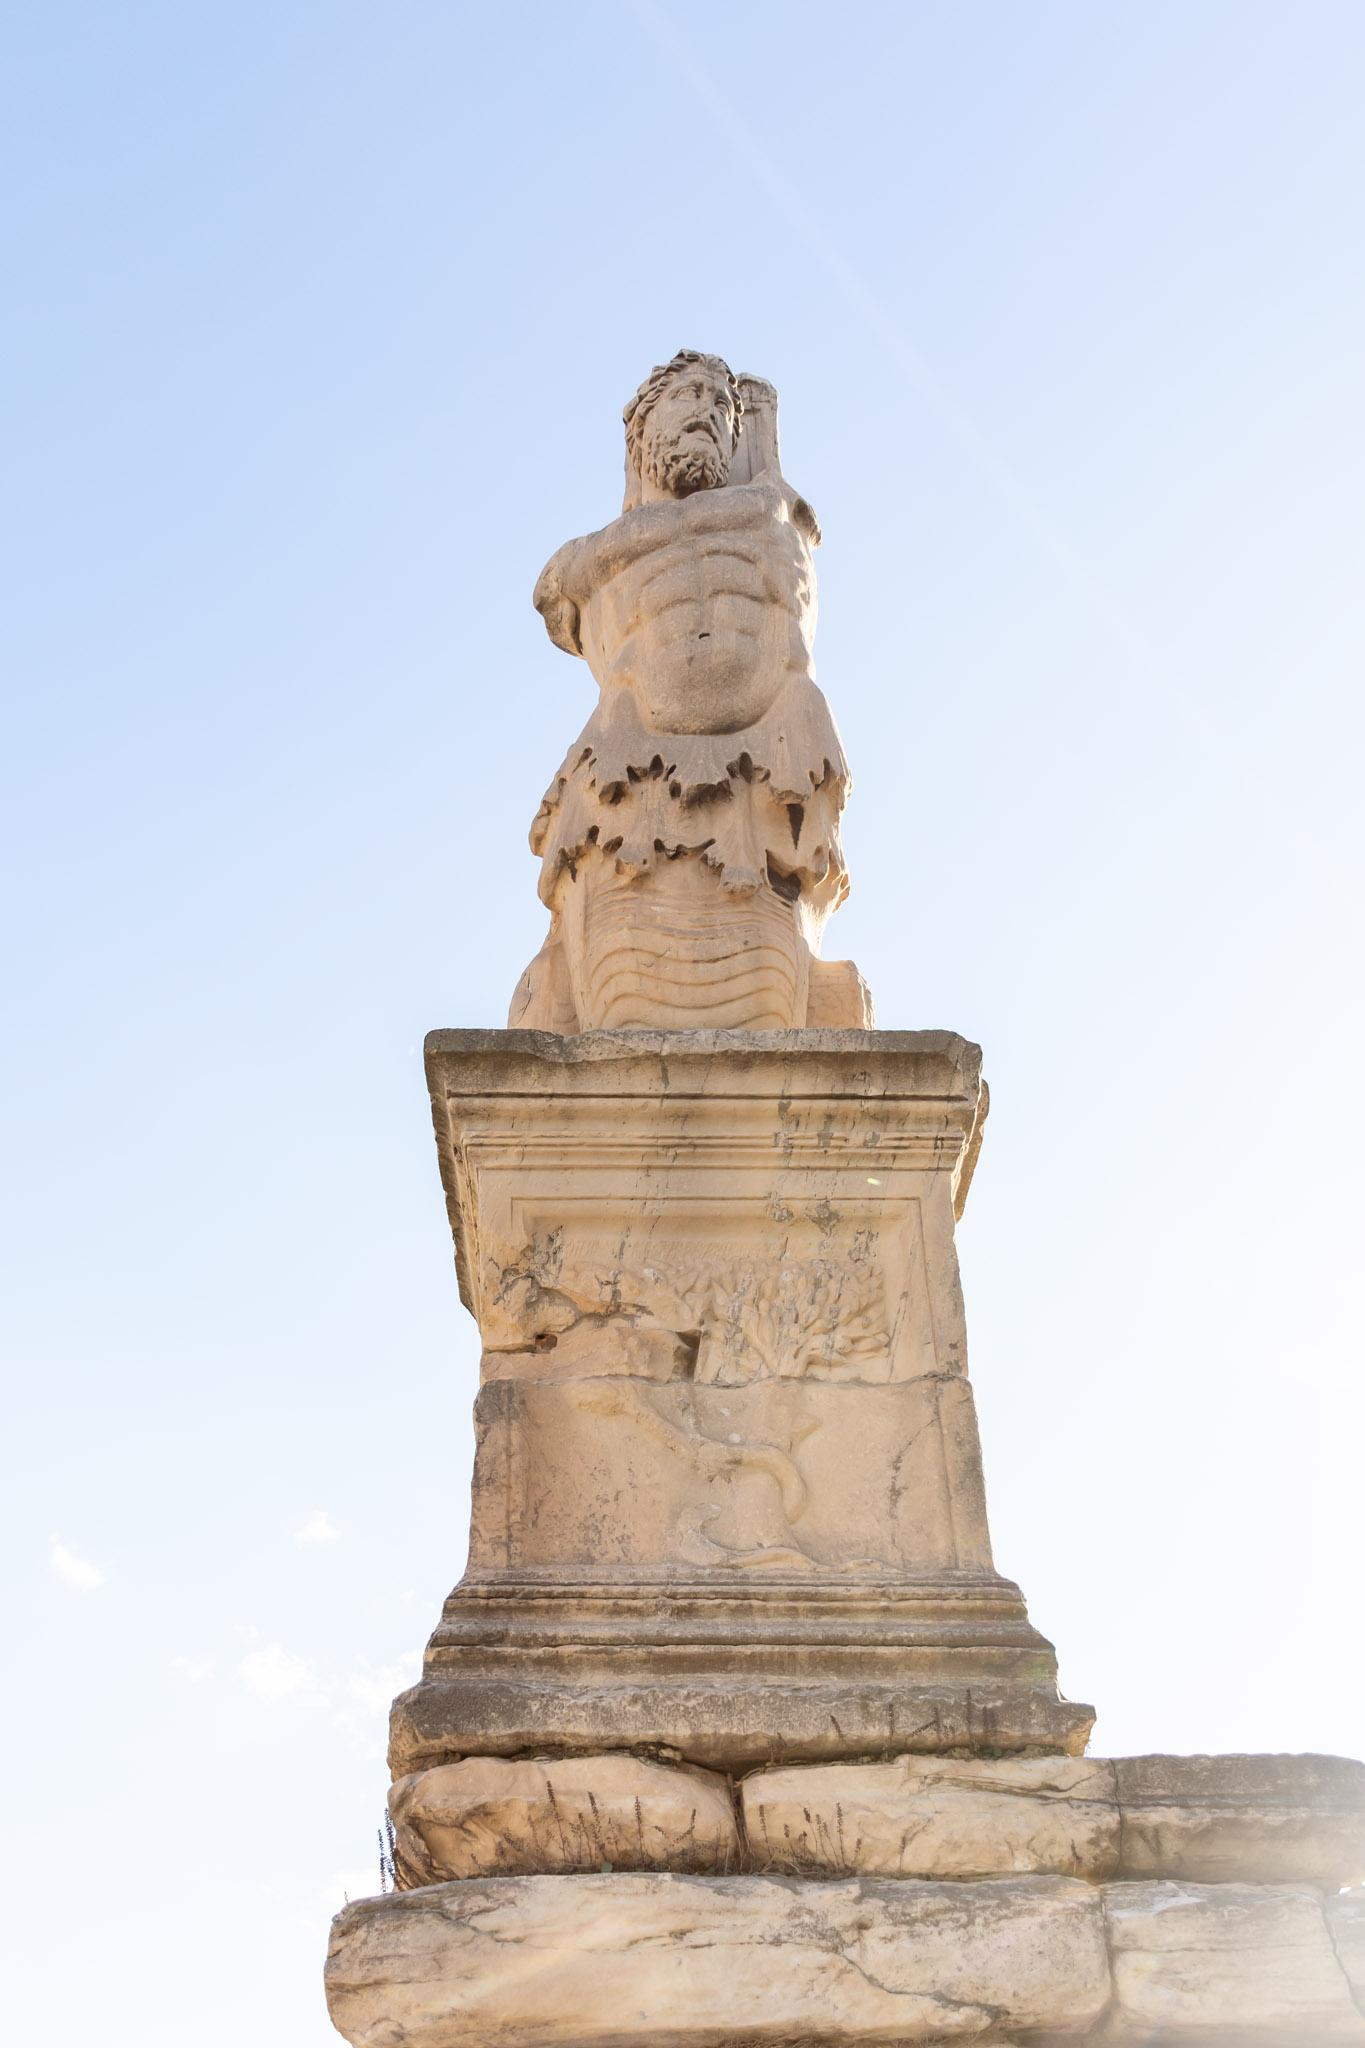 Statue at the Agora of Ancient Athens